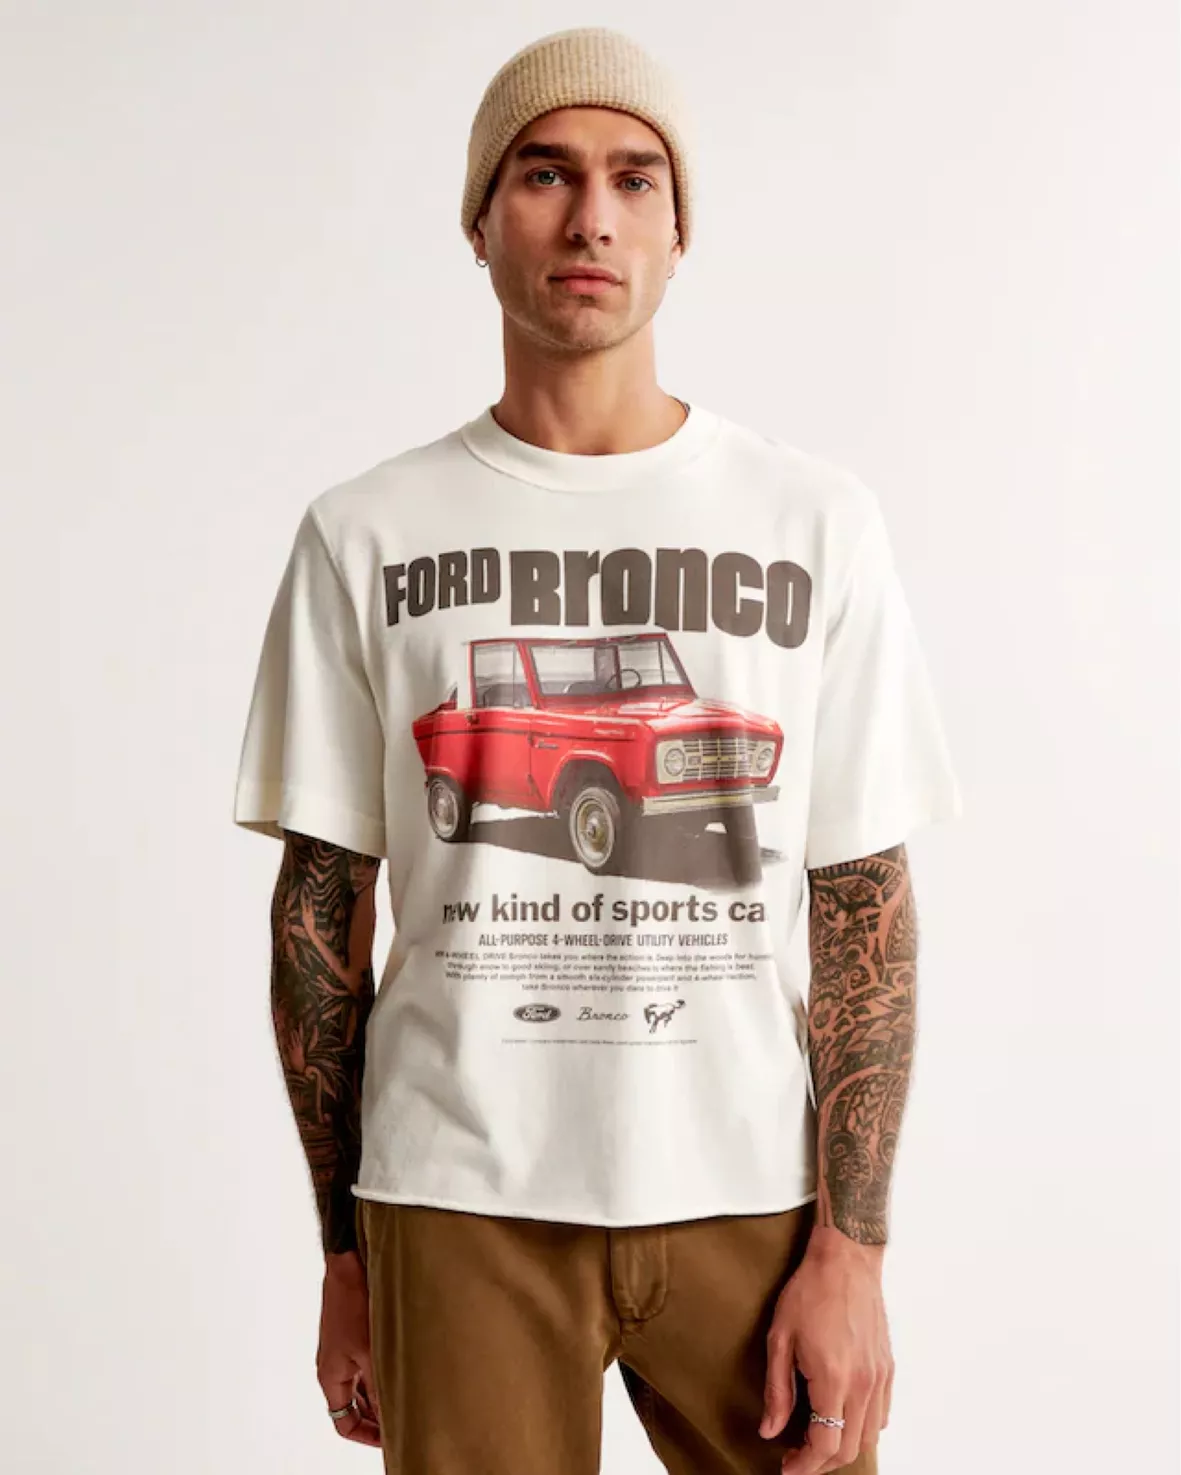 Bronco Graphic Tee curated on LTK